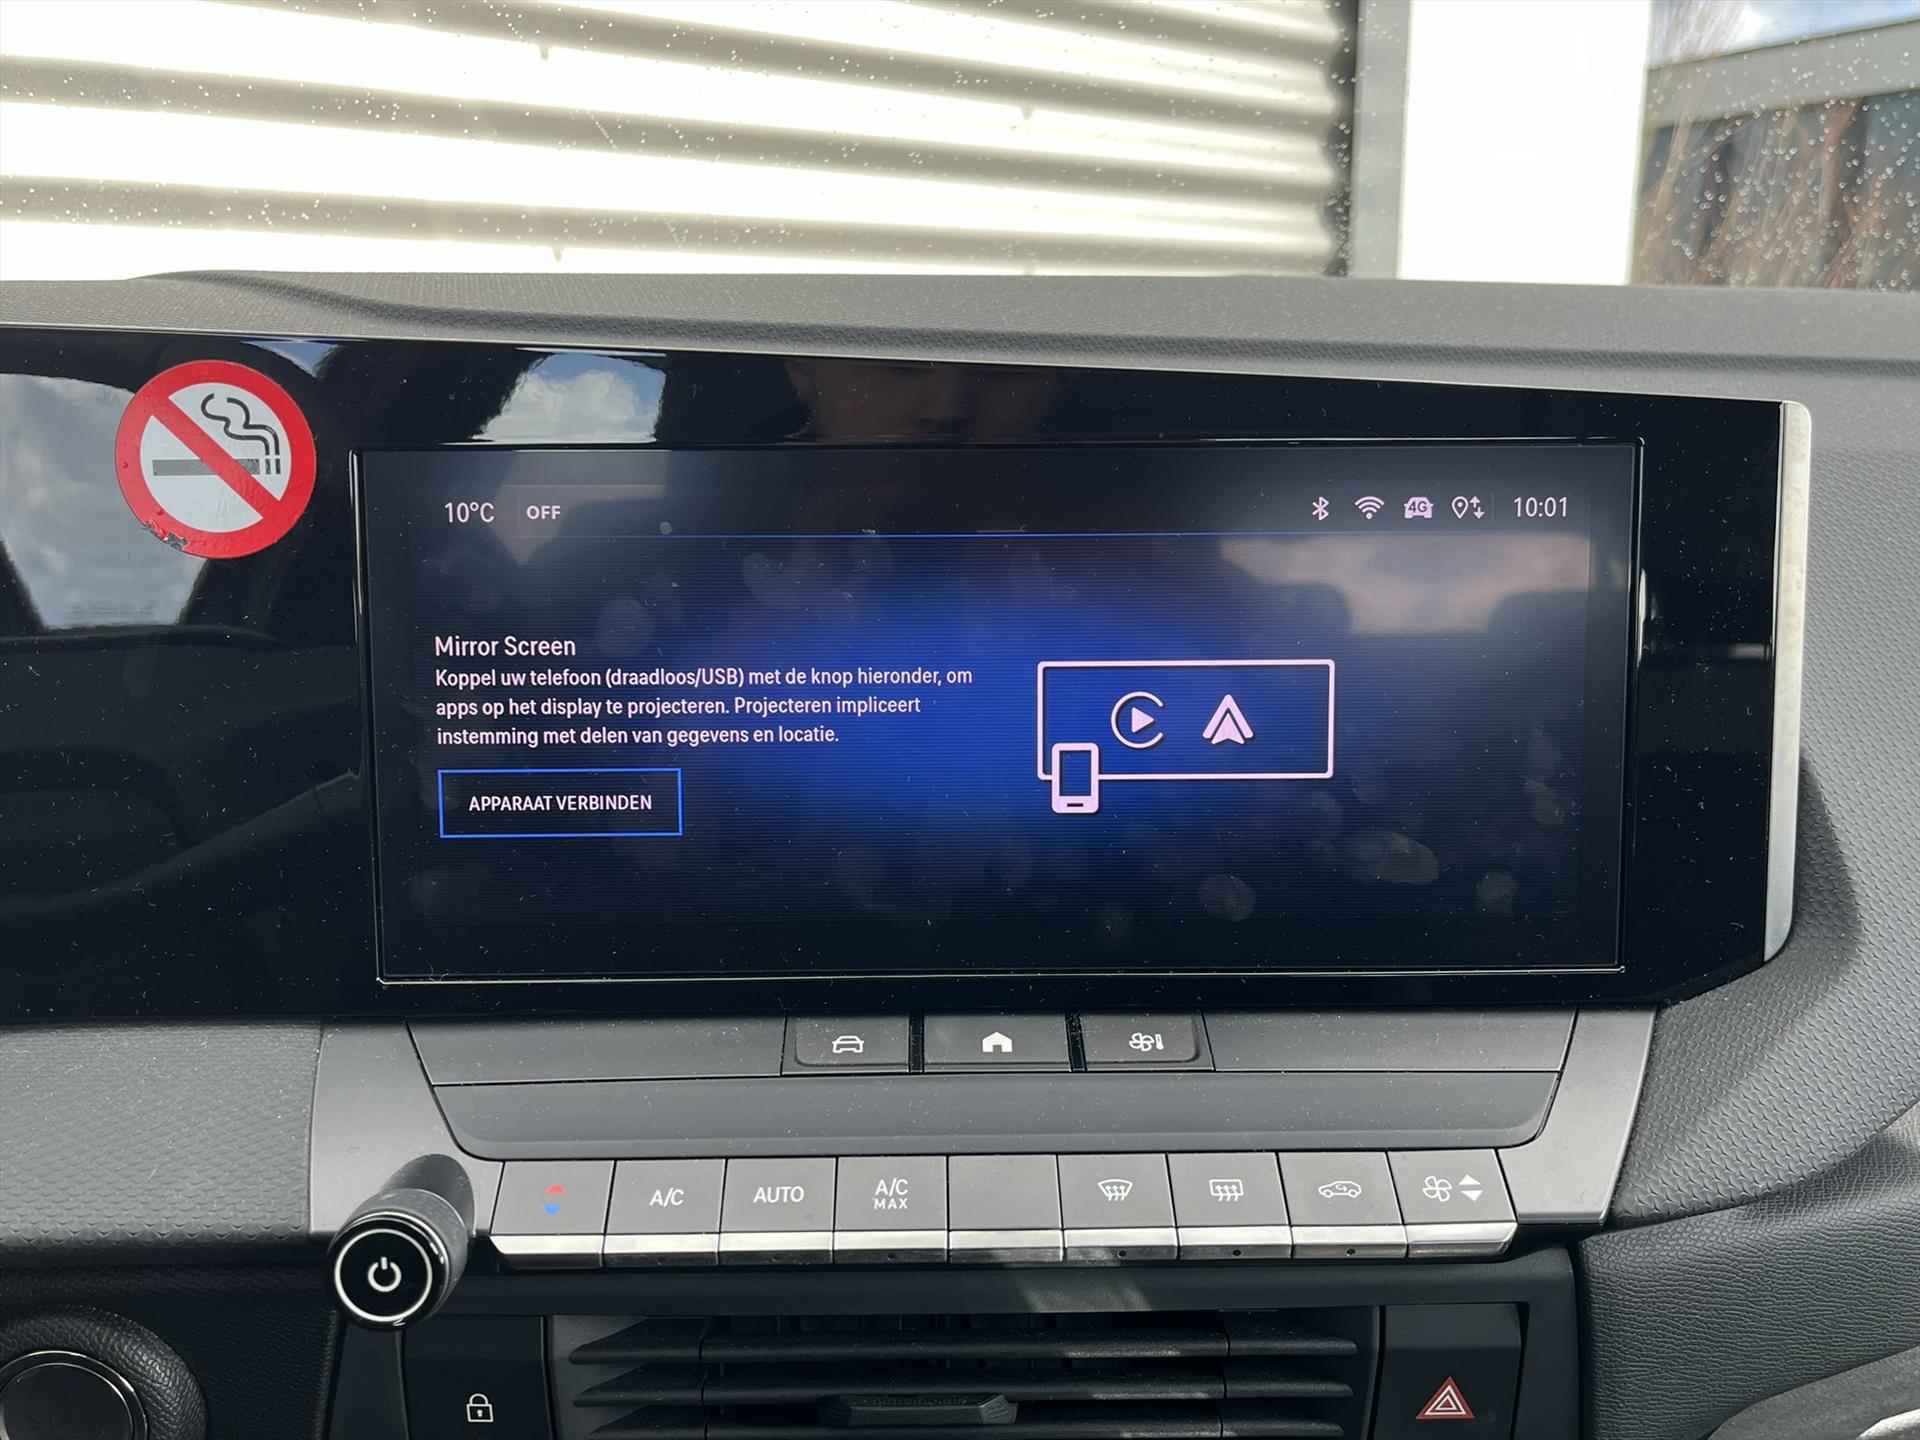 OPEL Astra 1.2 Turbo 110pk Start/Stop Edition | Navigatie | Apple CarPlay / Android Auto | Climate Control - 11/25